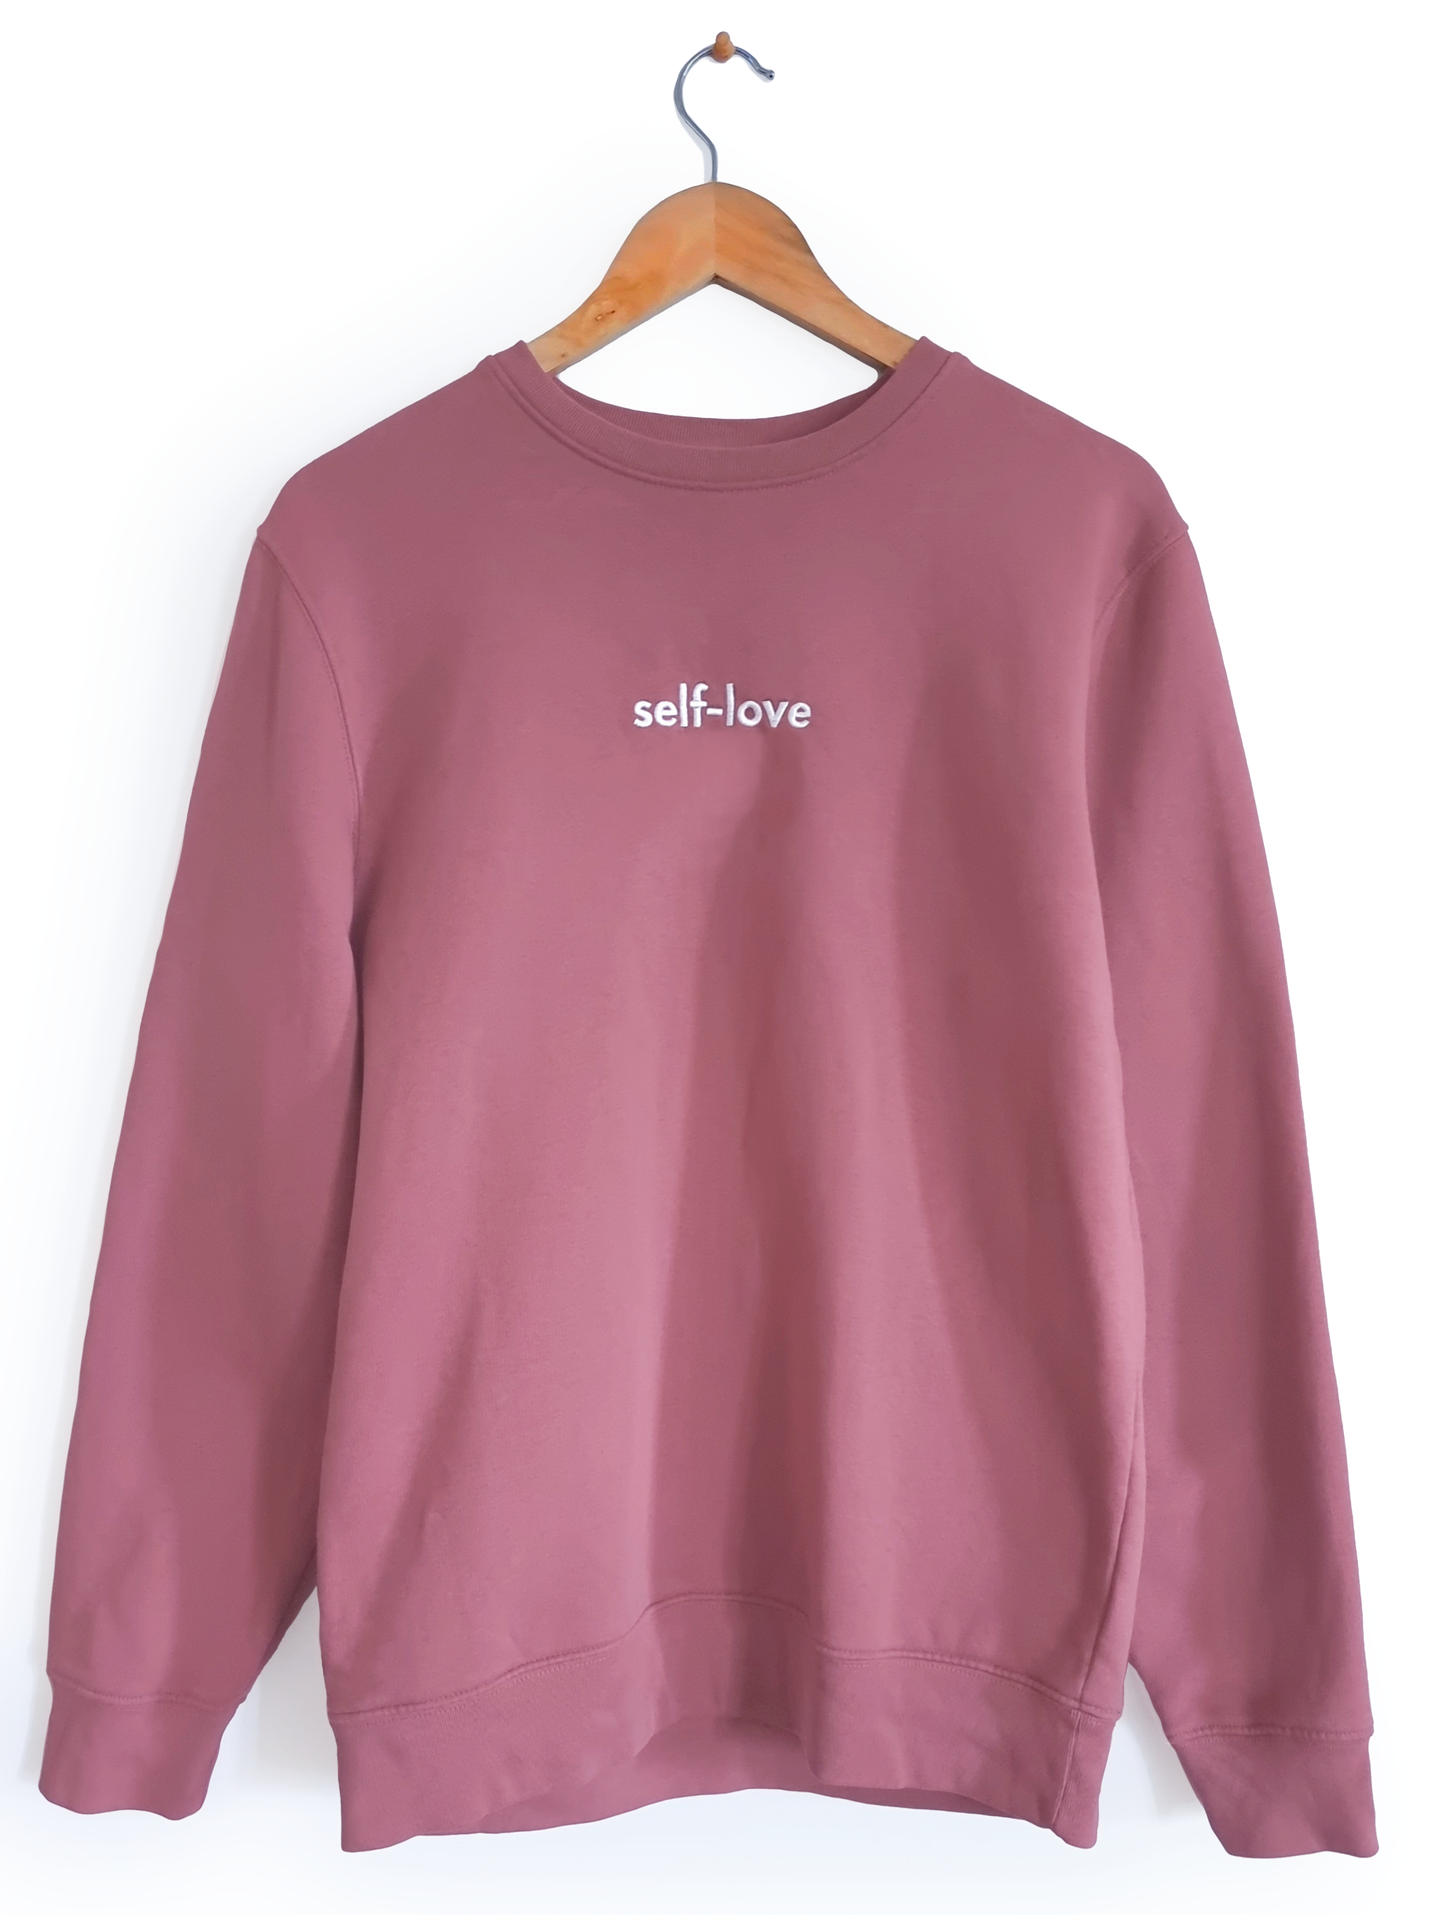 Ethical and sustainable, organic and recycled sweatshirt / sweater in mauve / pink / purple with embroidered self-love design for yoga, gym, or lounge wear.